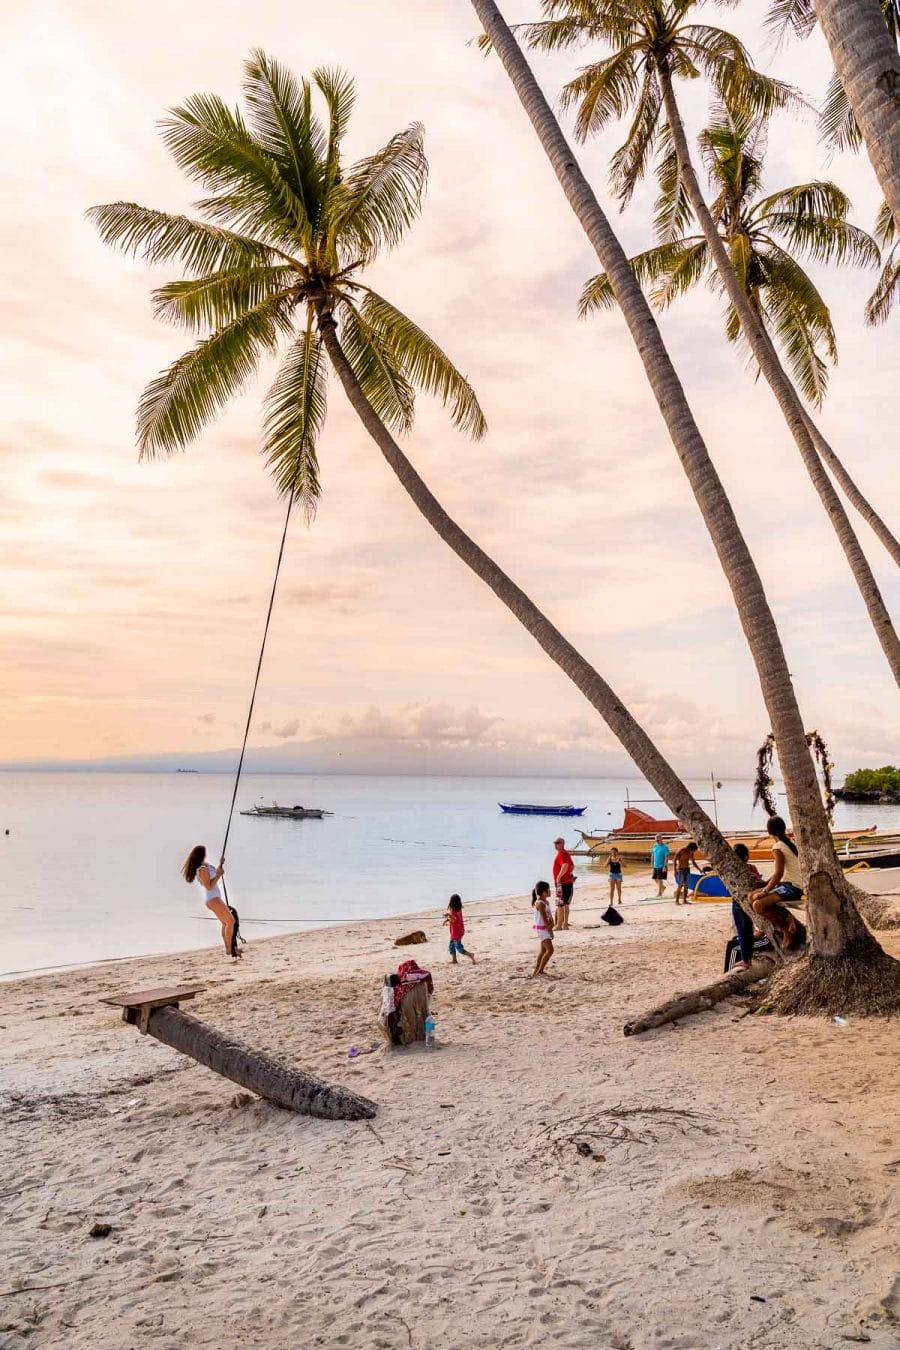 Girl swinging on a rope at Paliton Beach in Siquijor, Philippines